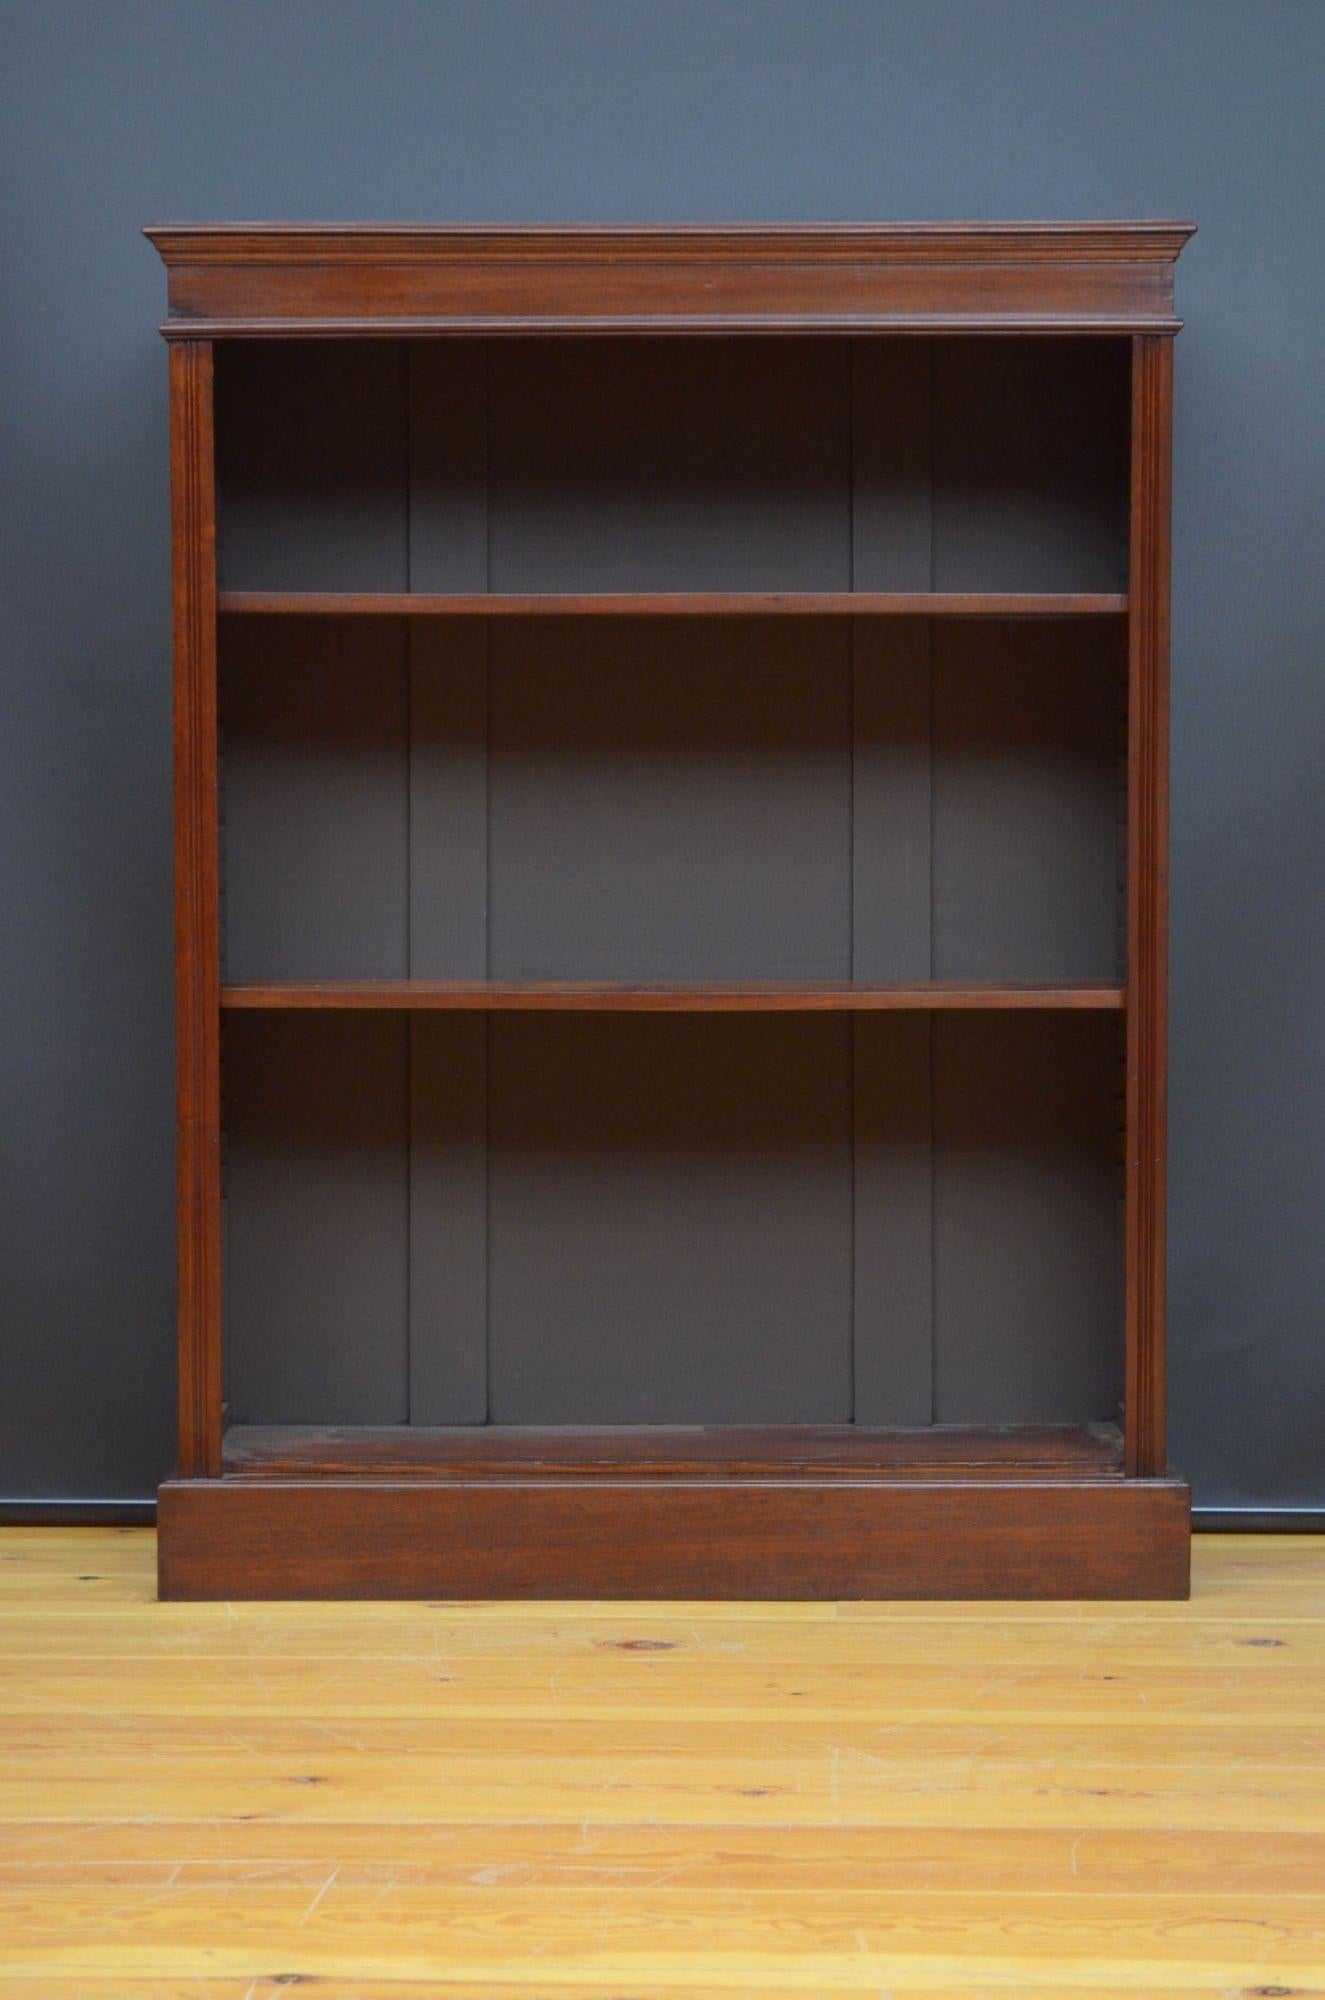 Sn5254 Late Victorian mahogany open bookcase of simple design, having oversailing top above three shelves (only 2 on the photos) flanked by reeded pilasters, all standing on moulded plinth base. This antique bookcase is in home ready condition.